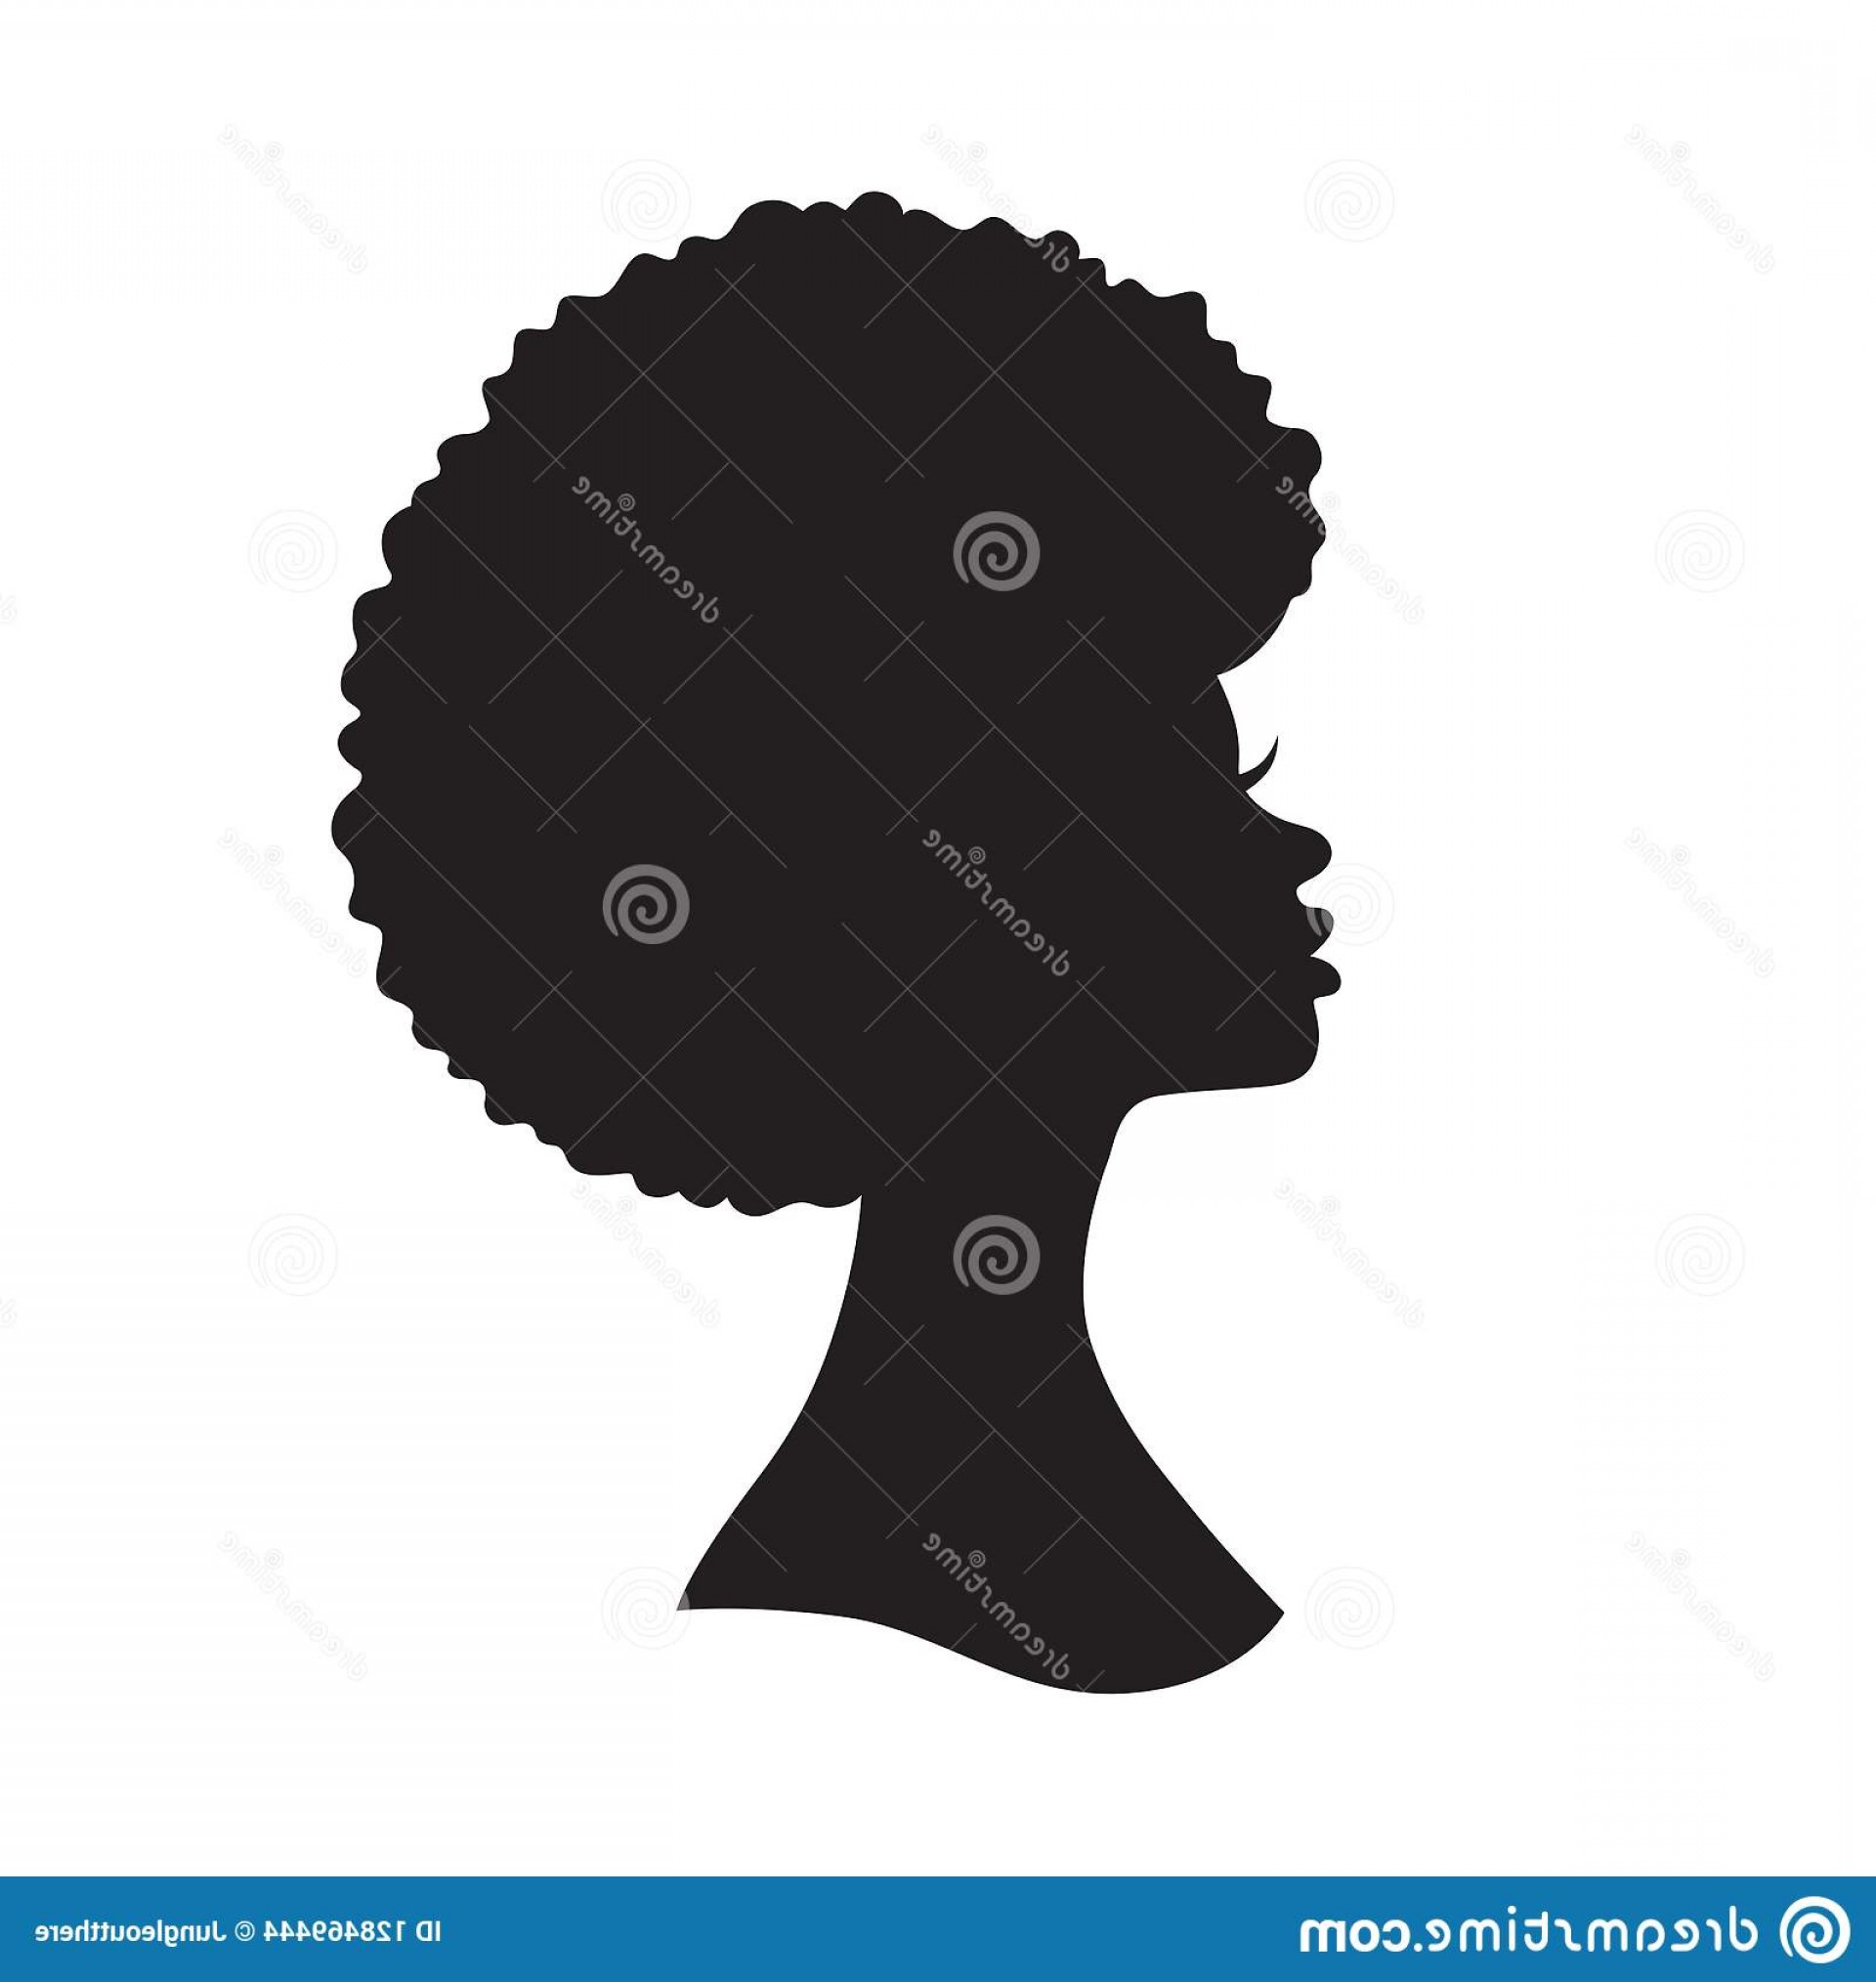 Download 327 Afro vector images at Vectorified.com